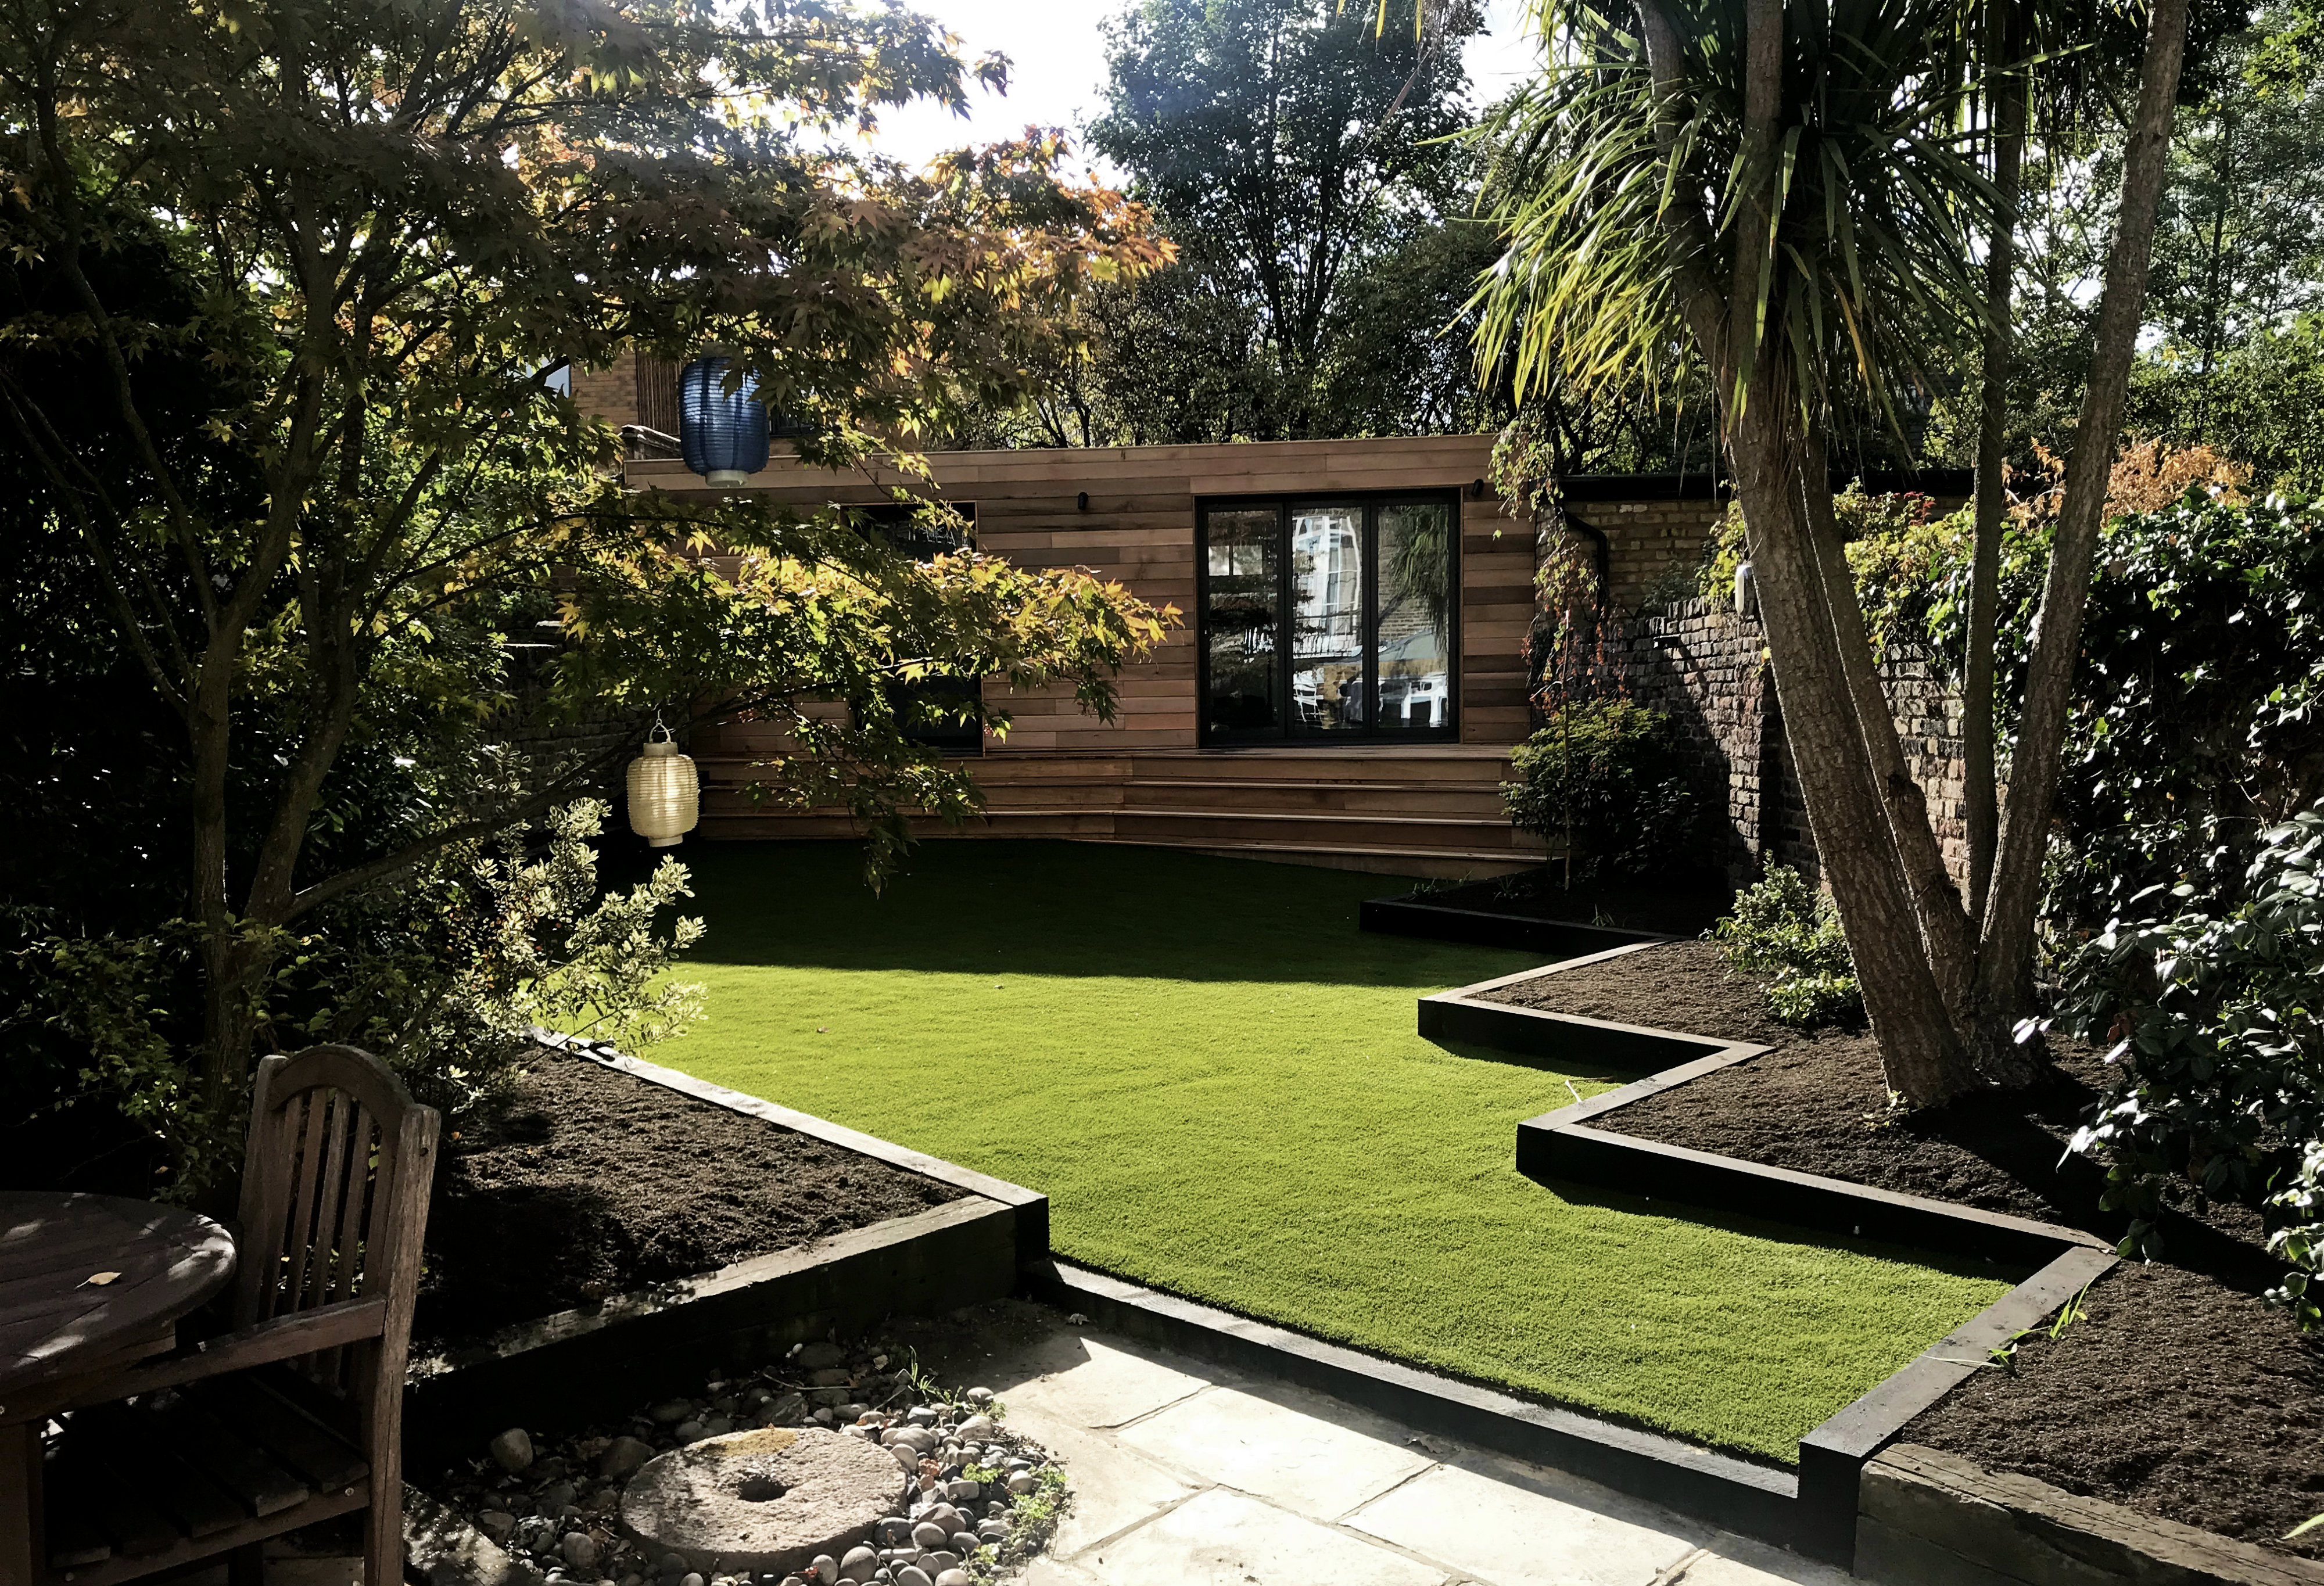 </p> <p>Find your ideal home design pro on designfor-me.com - get matched and see who's interested in your home project. Click image to see more inspiration from our design pros</p> <p>Design by Tom, architect from Southwark, London</p> <p>#architecture #homedesign #modernhomes #homeinspiration #gardenroom #gardendesign #gardeninspiration #gardenlove #gardenideas #gardens </p> <p>